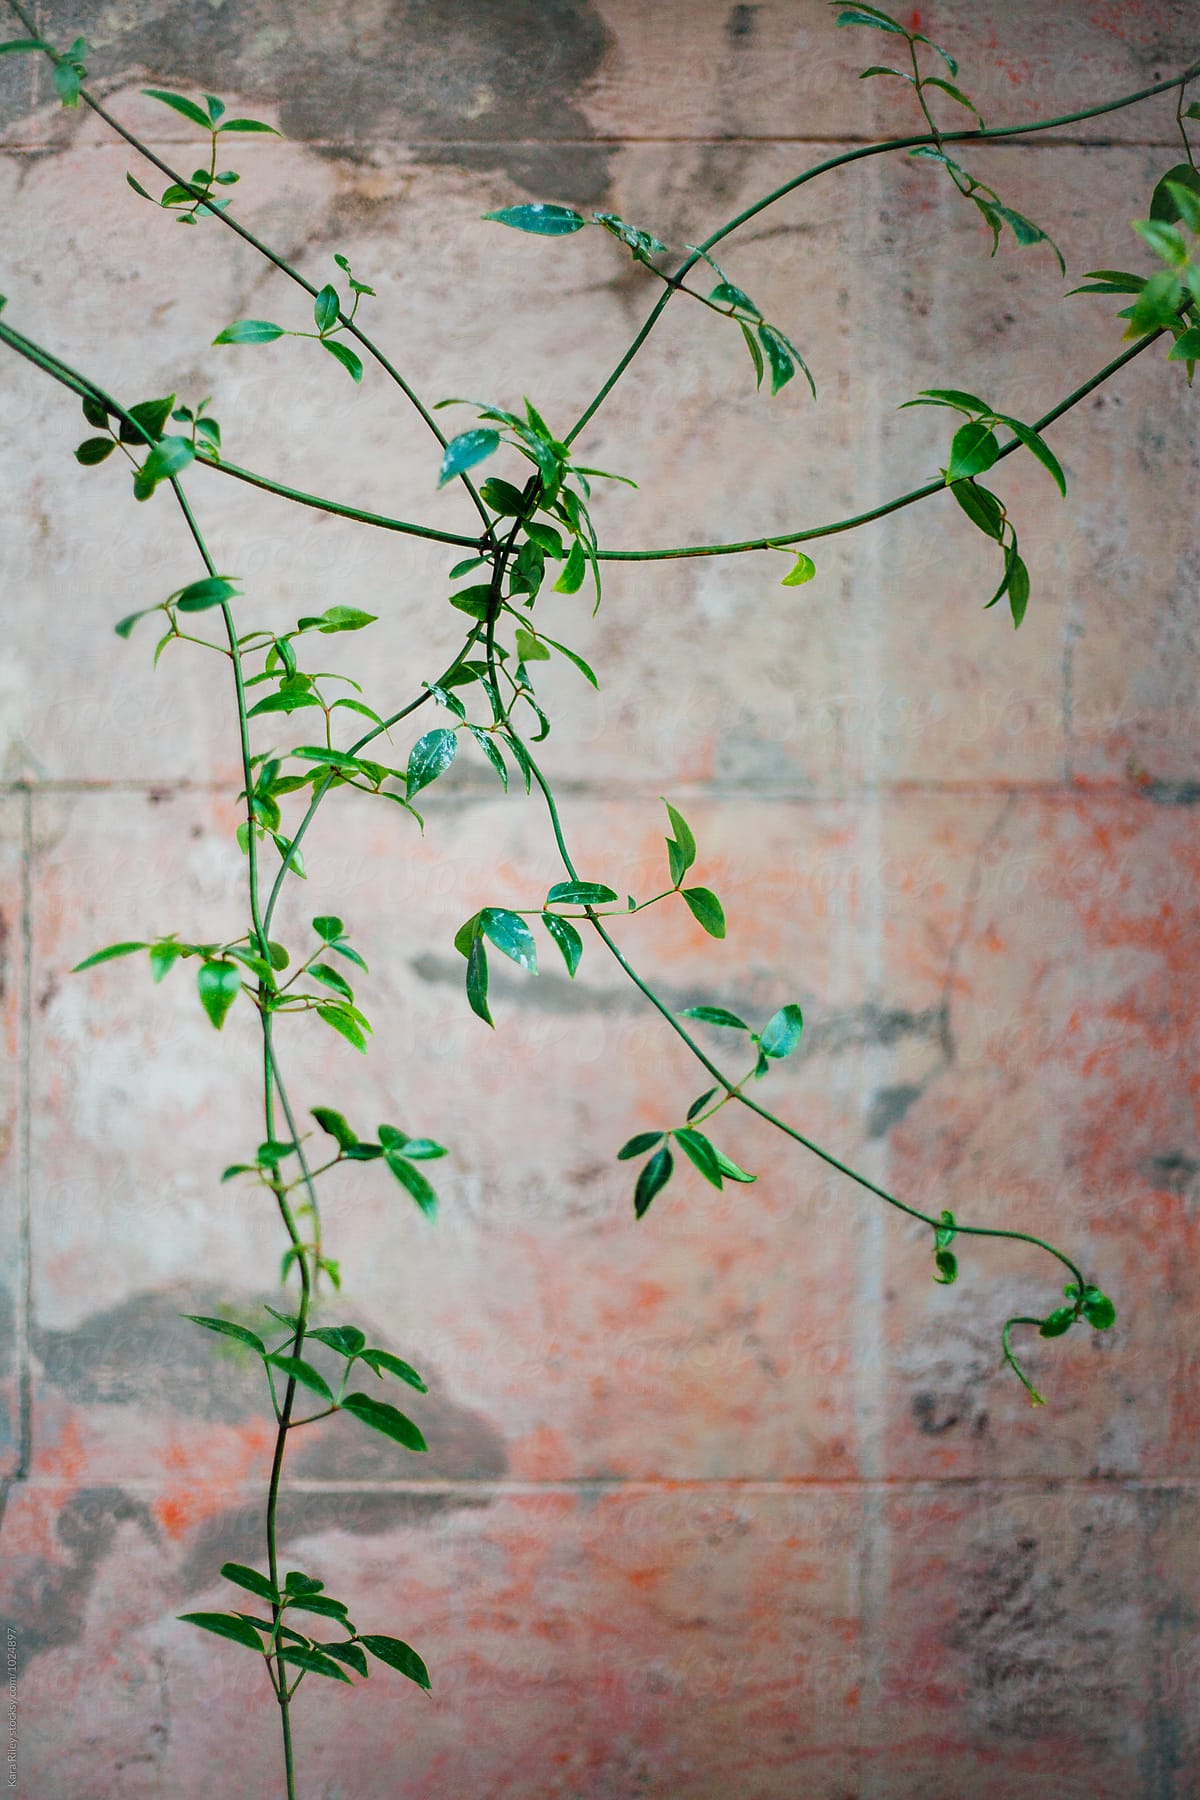 Green Vine growing in front of pink wall